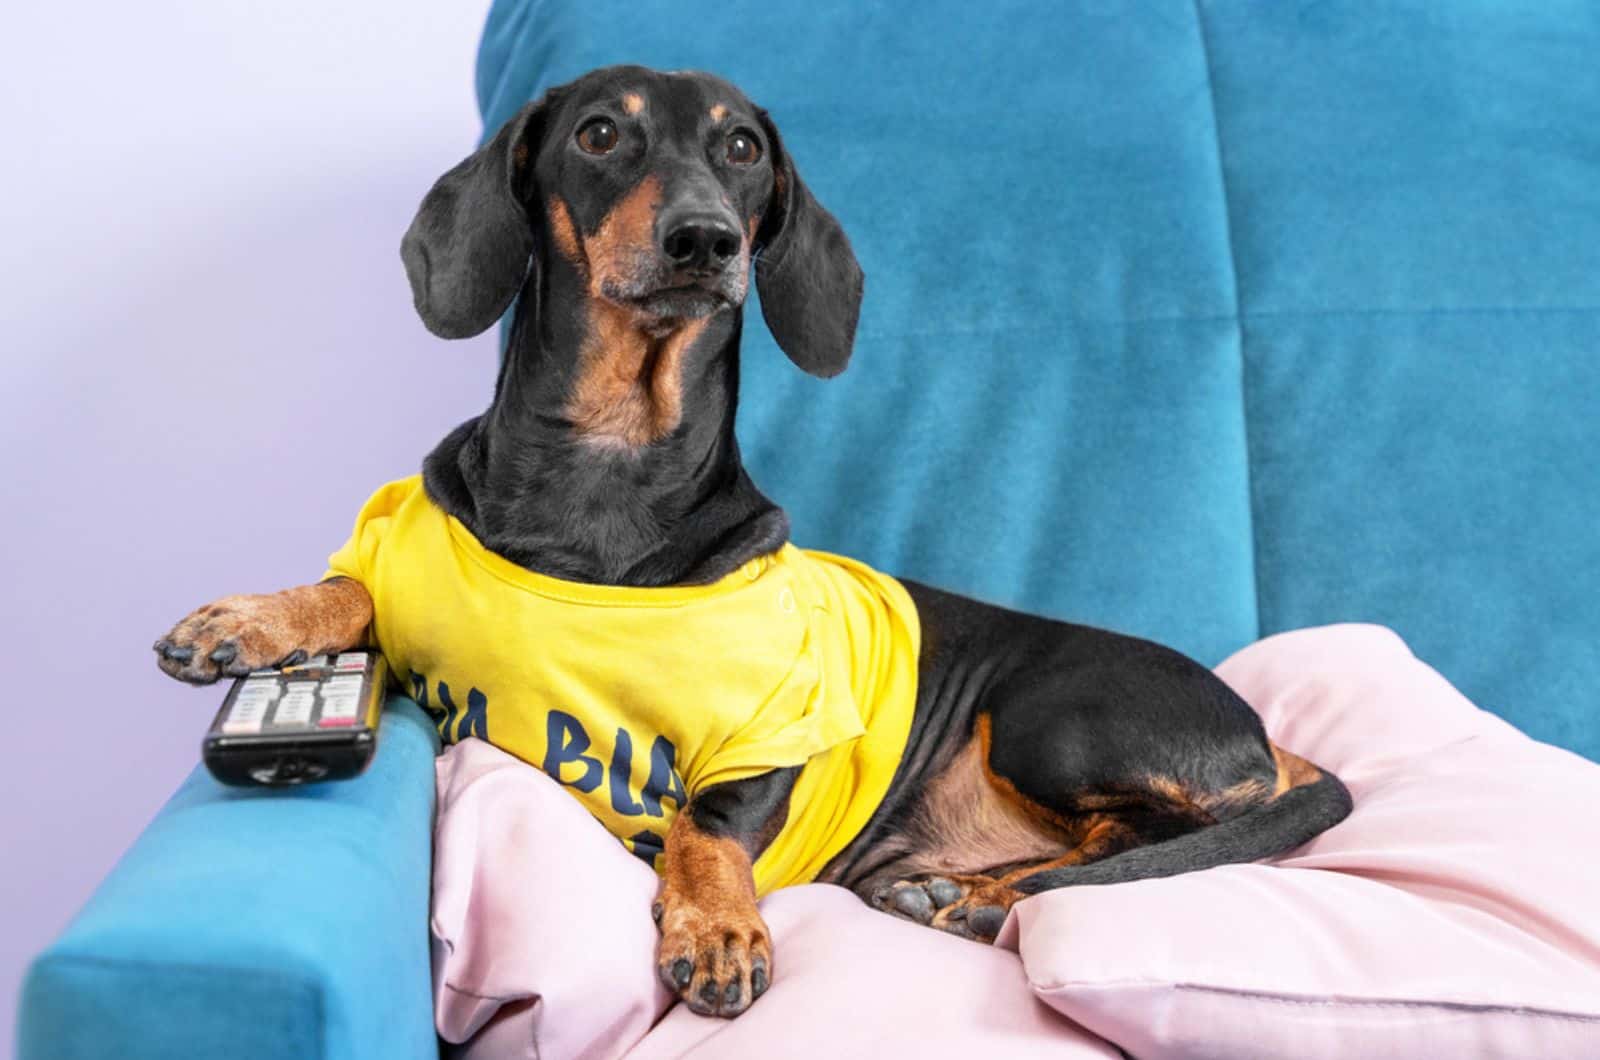 dachshund dog in yellow t-shirt is lying on couch  with remote control between paws